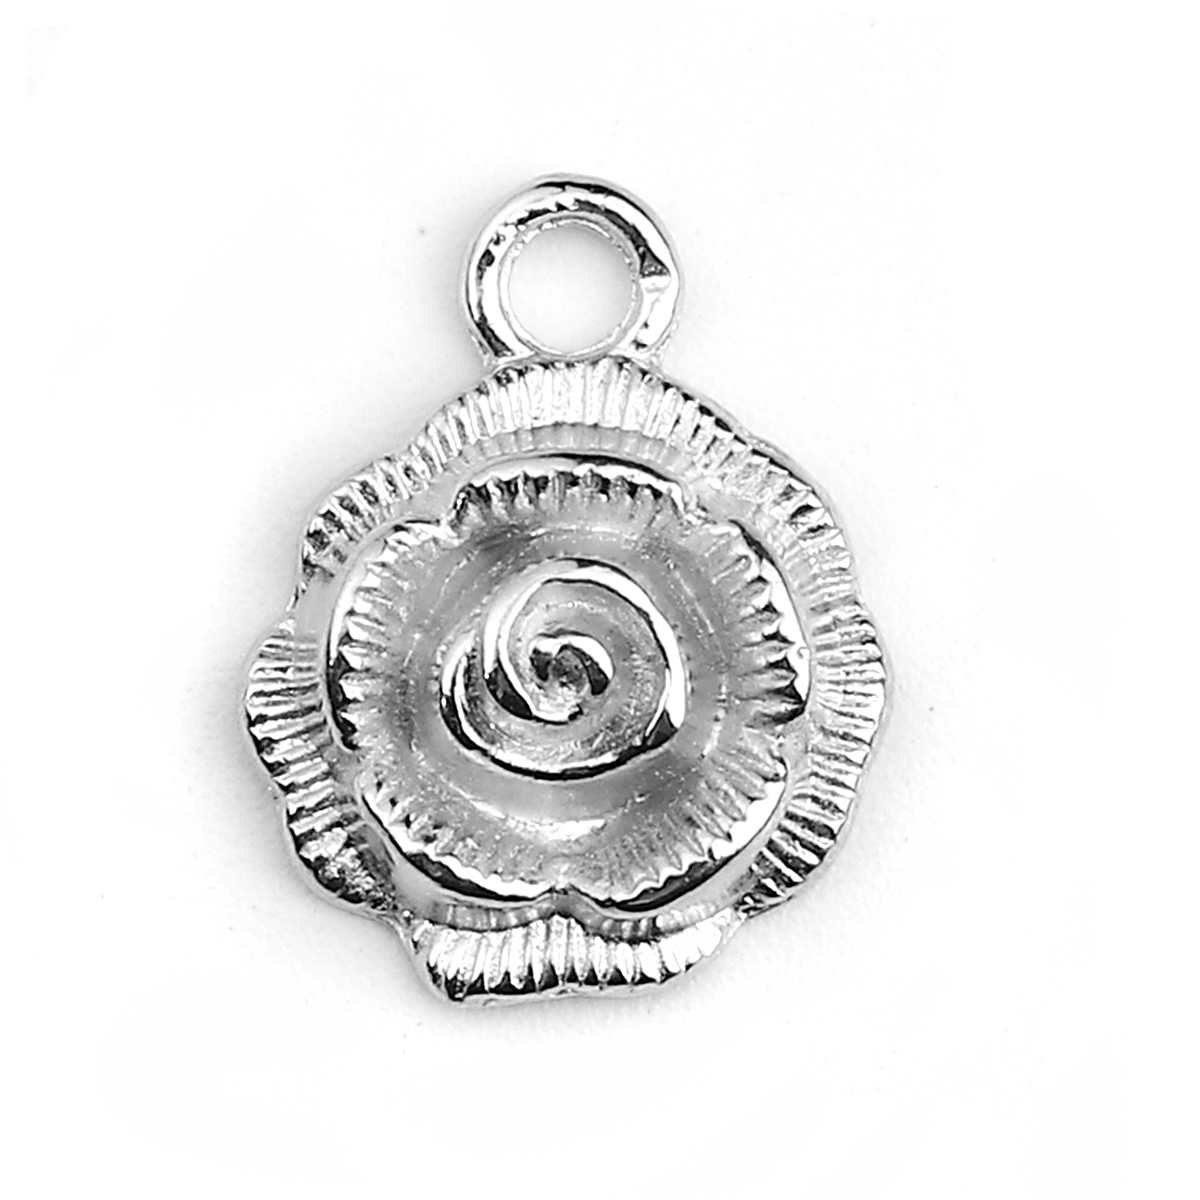 Silver Rose Pendant | Rose Charms | Floral Pendant | Flower Jewellery Supplies | Nature Charms | Wedding Decoration | Favor Charm | Zipper Pull Charm